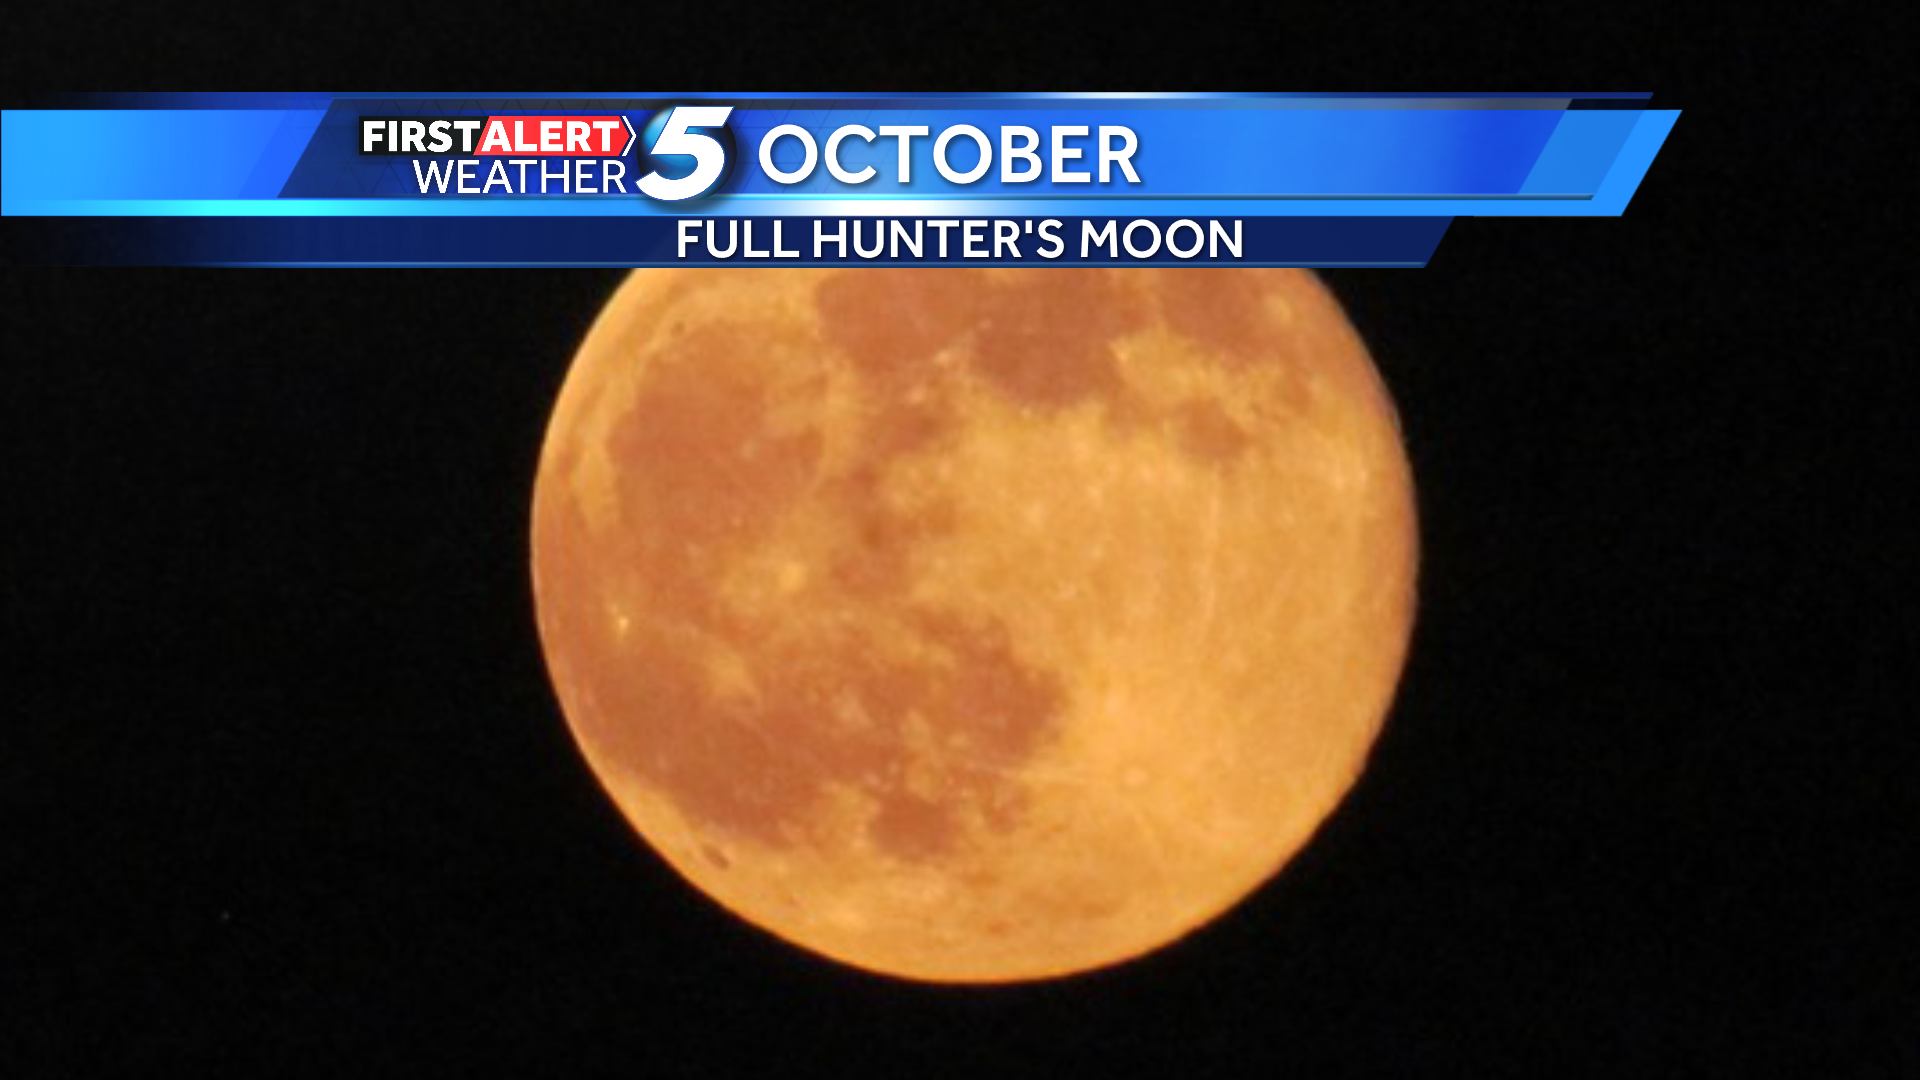 October's Full Moon known as the Hunter's moon.